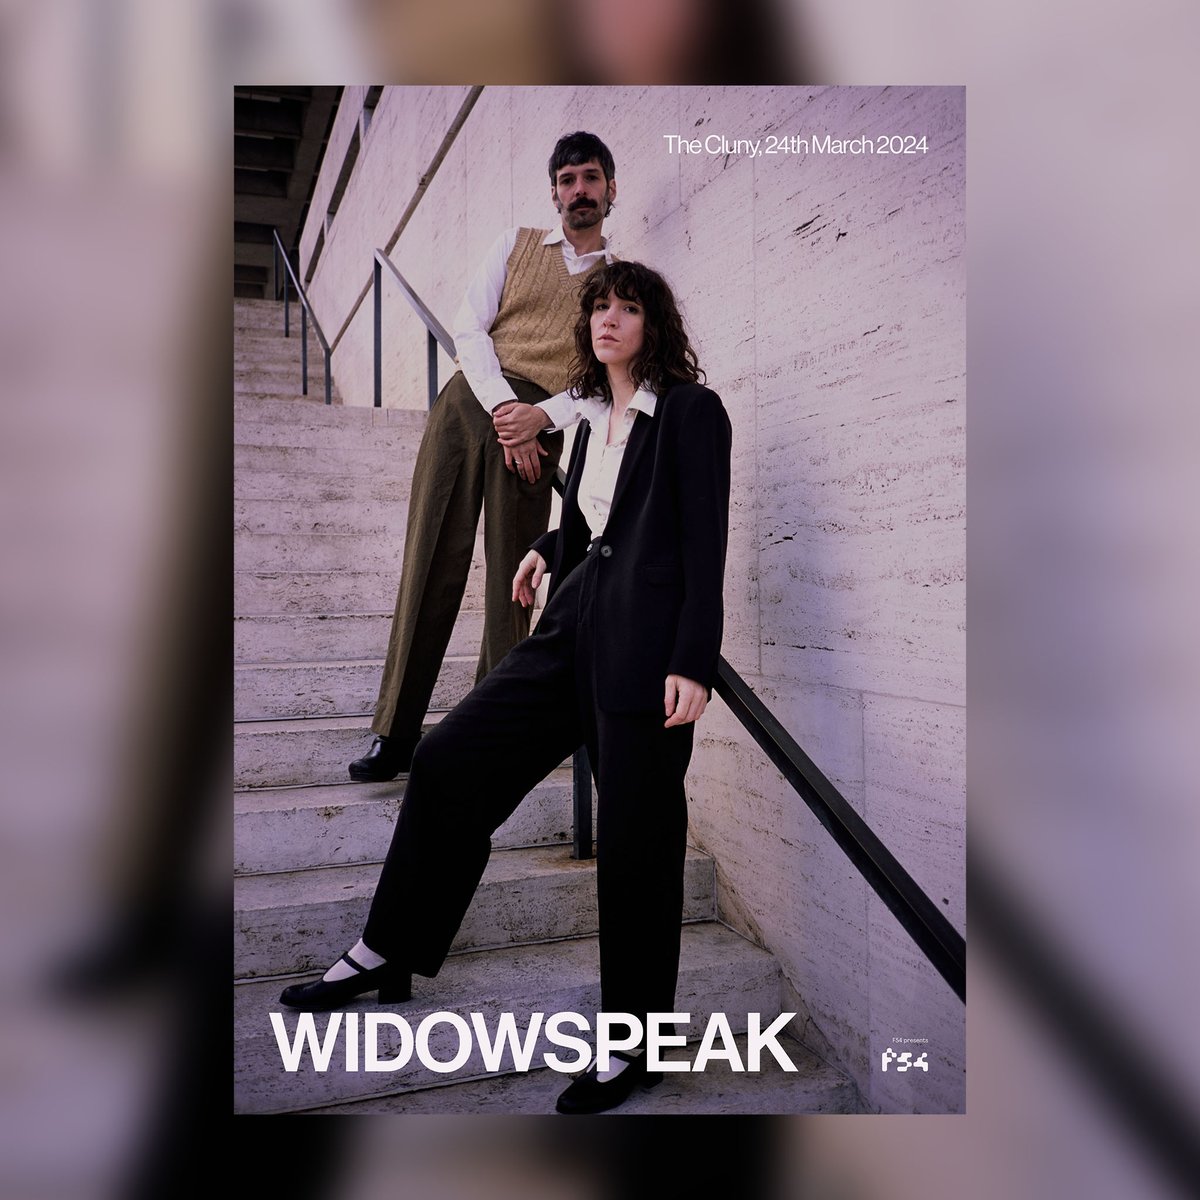 LIVE TOMORROW Brooklyn Indie Rock Duo @widowspeaking return to the North East for a big night in at the @thecluny, Newcastle✨ Tickets: bit.ly/3Nf1DbM